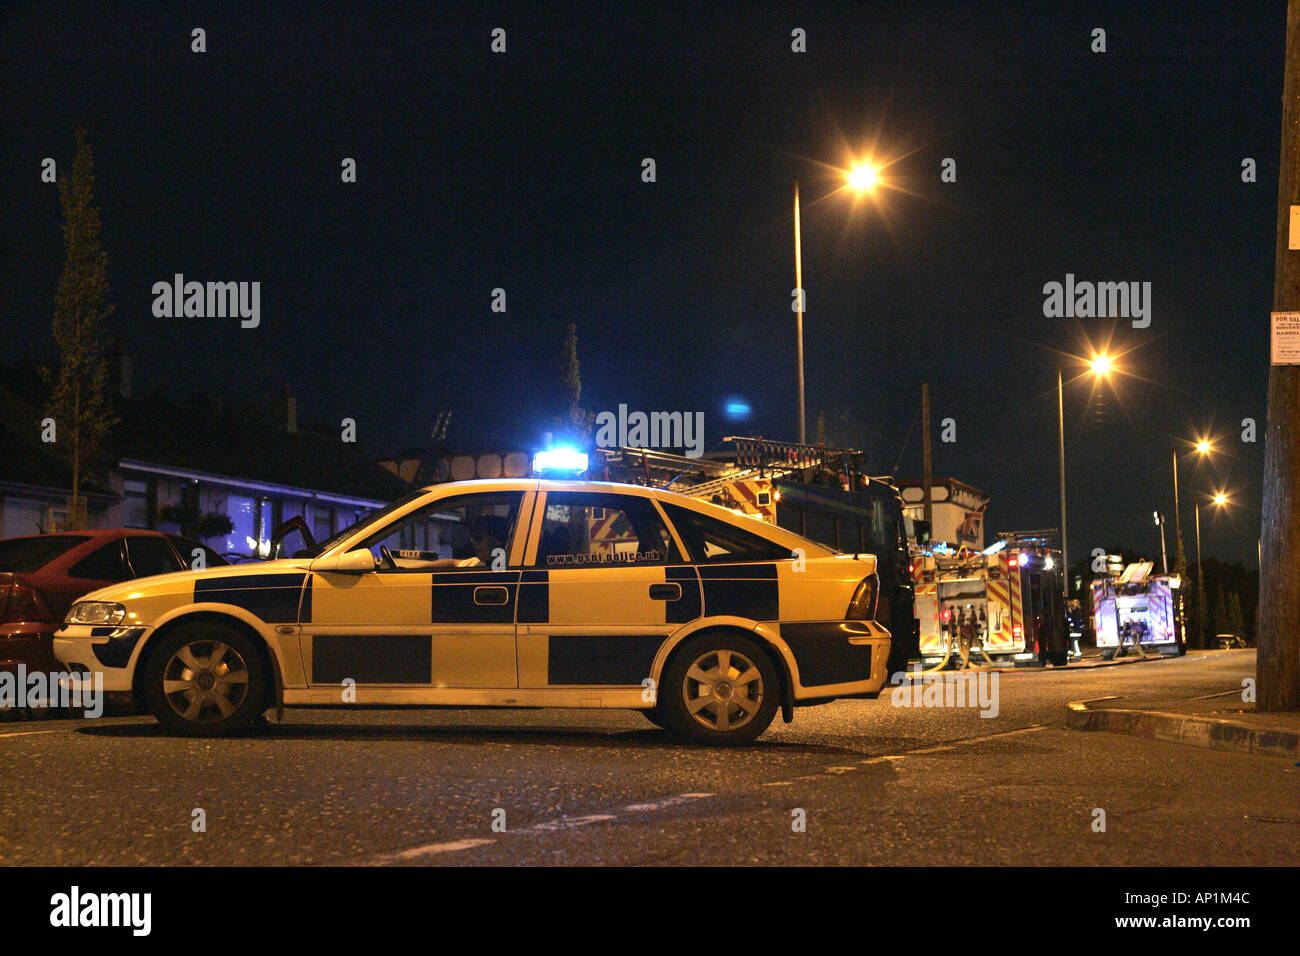 Police squad car and fire service vehicles attend fire at Cloughfern arms during loyalist feud at night Stock Photo